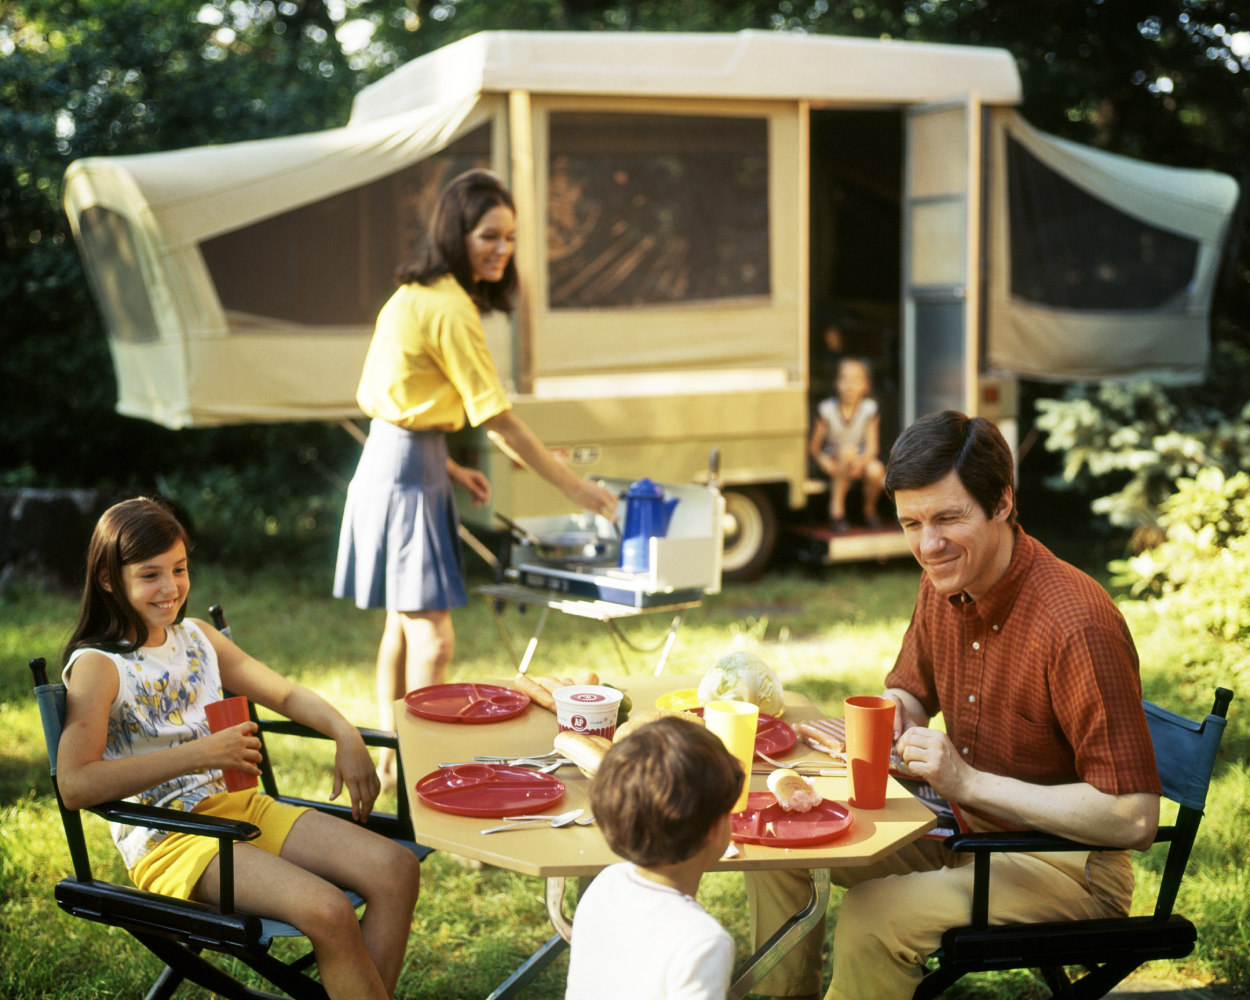 A family smiles outside of their pop-up camper